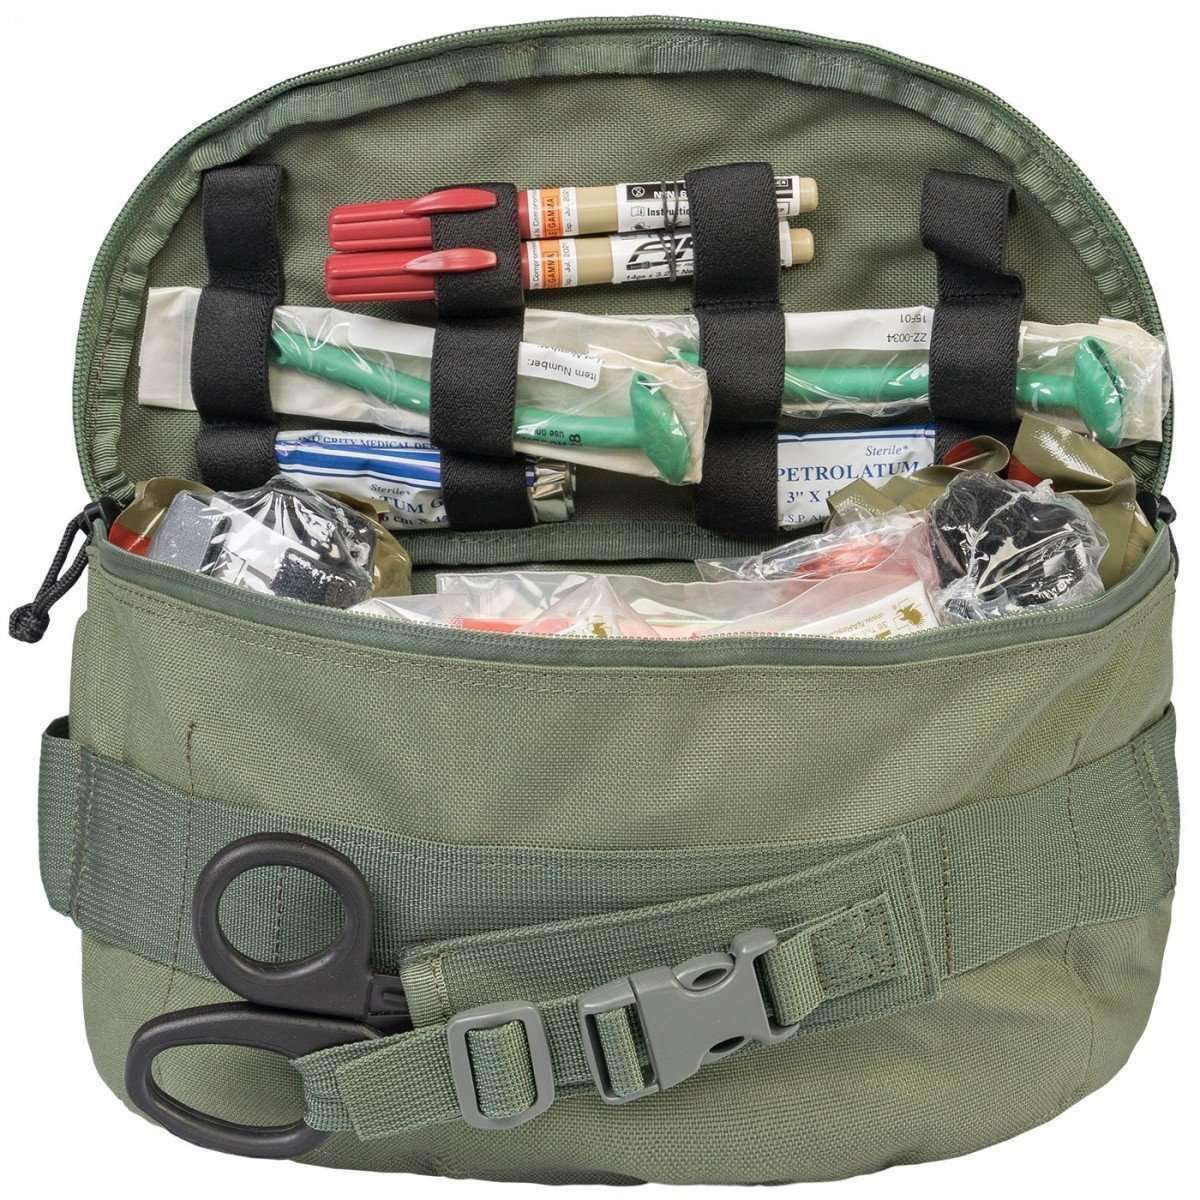 Casualty Response Kits - MED-TAC International Corp.